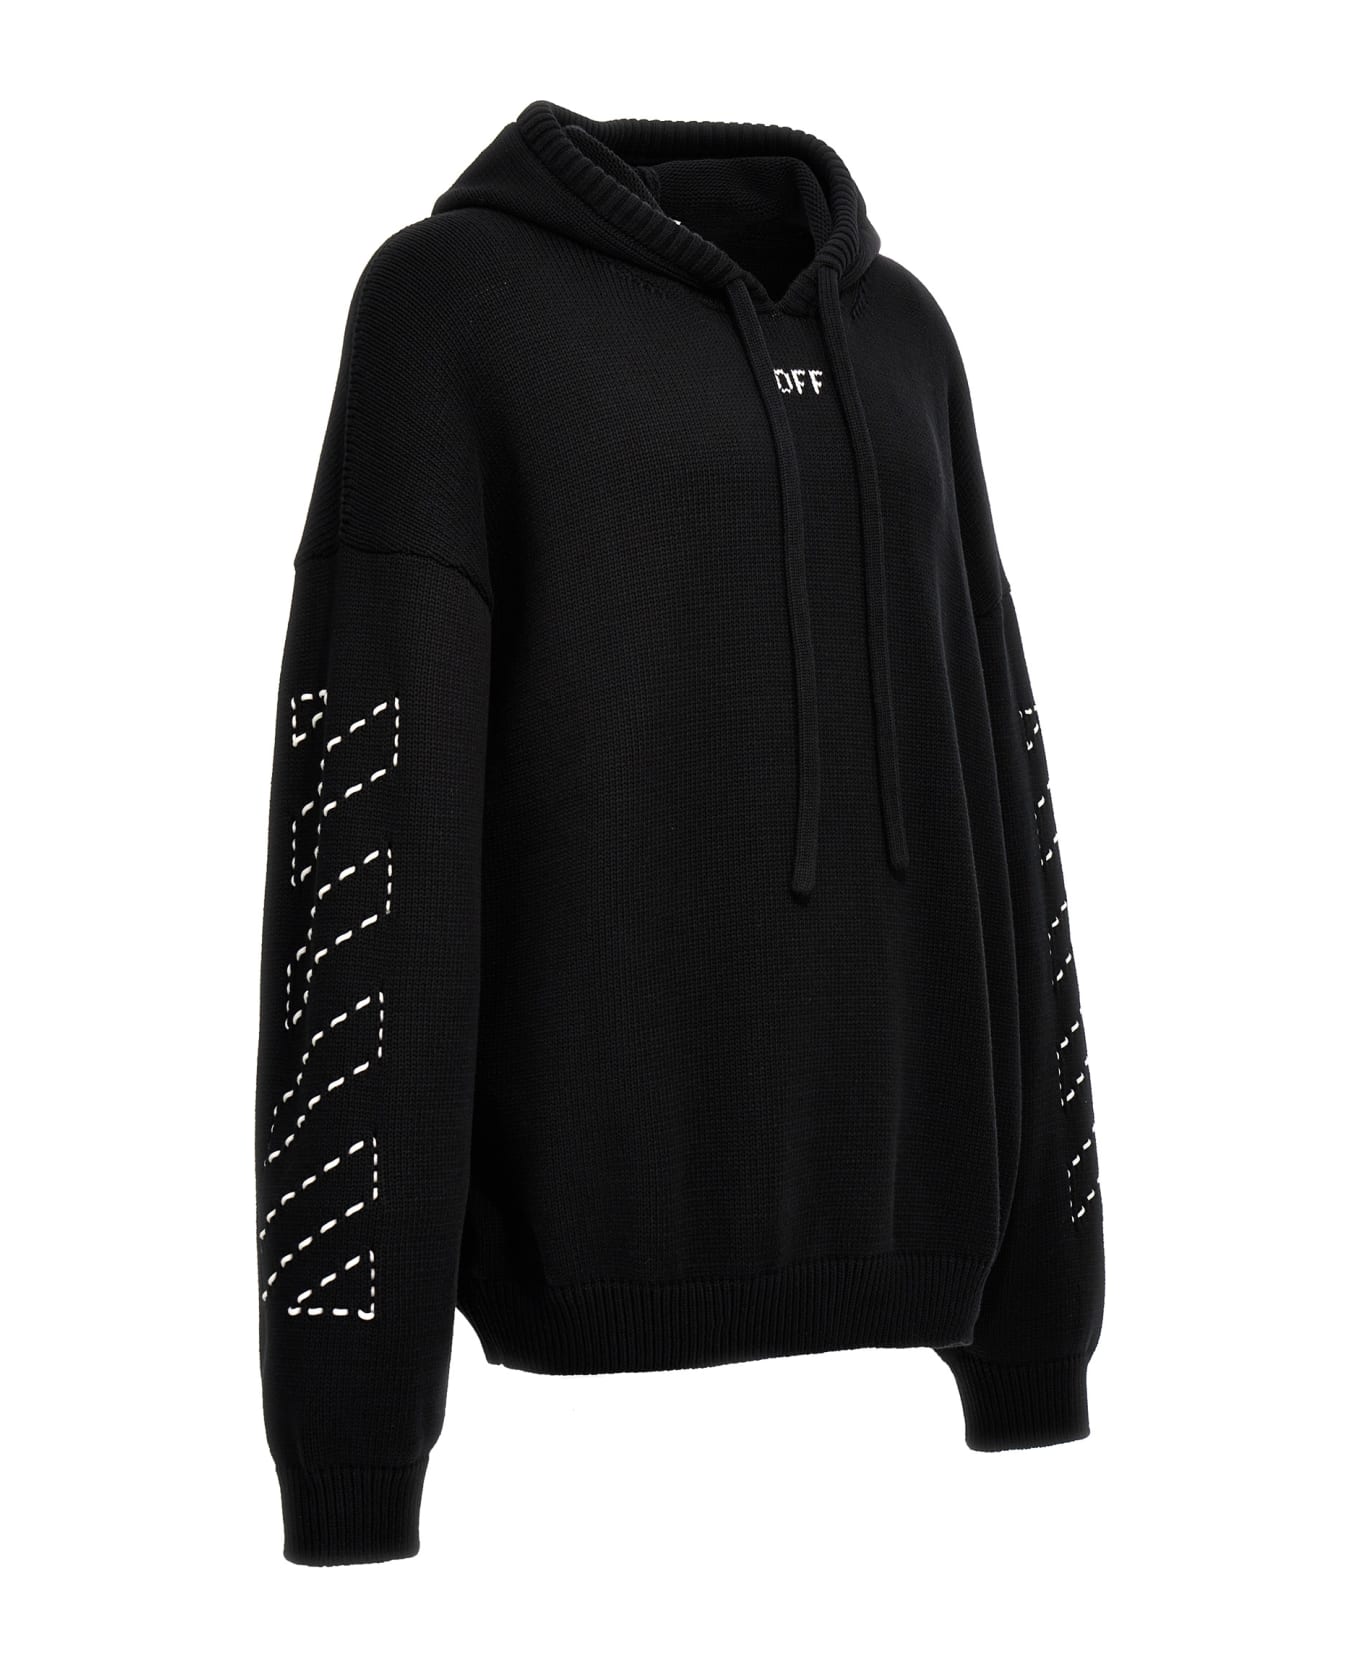 Off-White 'stitch Arr Diags' Hooded Sweater - White/Black